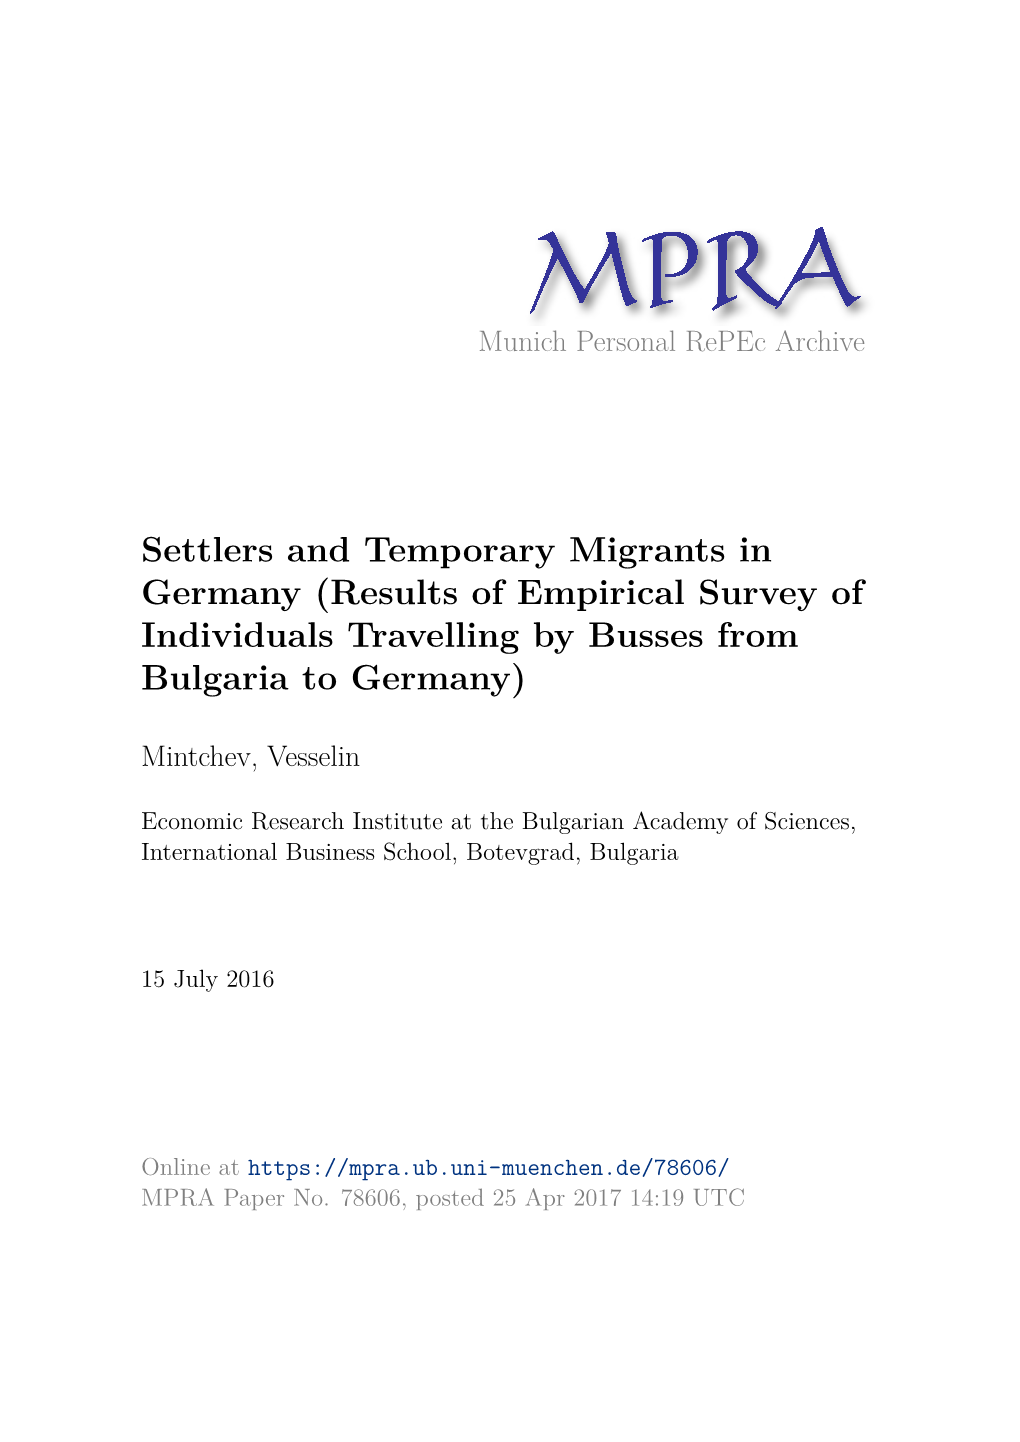 Settlers and Temporary Migrants in Germany (Results of Empirical Survey of Individuals Travelling by Busses from Bulgaria to Germany)